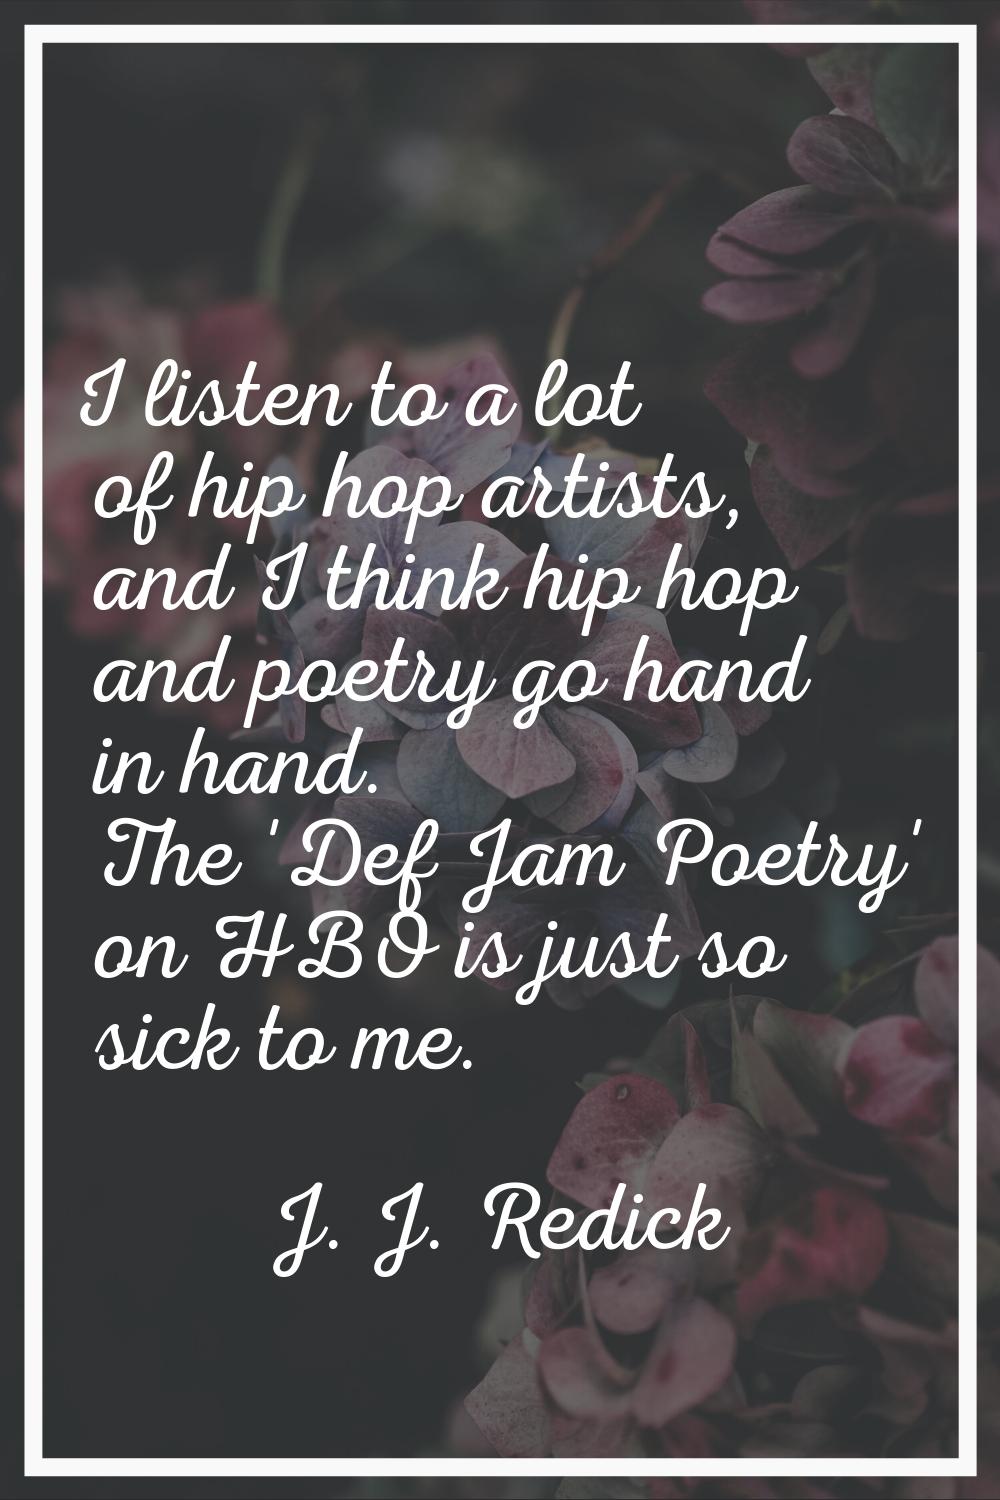 I listen to a lot of hip hop artists, and I think hip hop and poetry go hand in hand. The 'Def Jam 